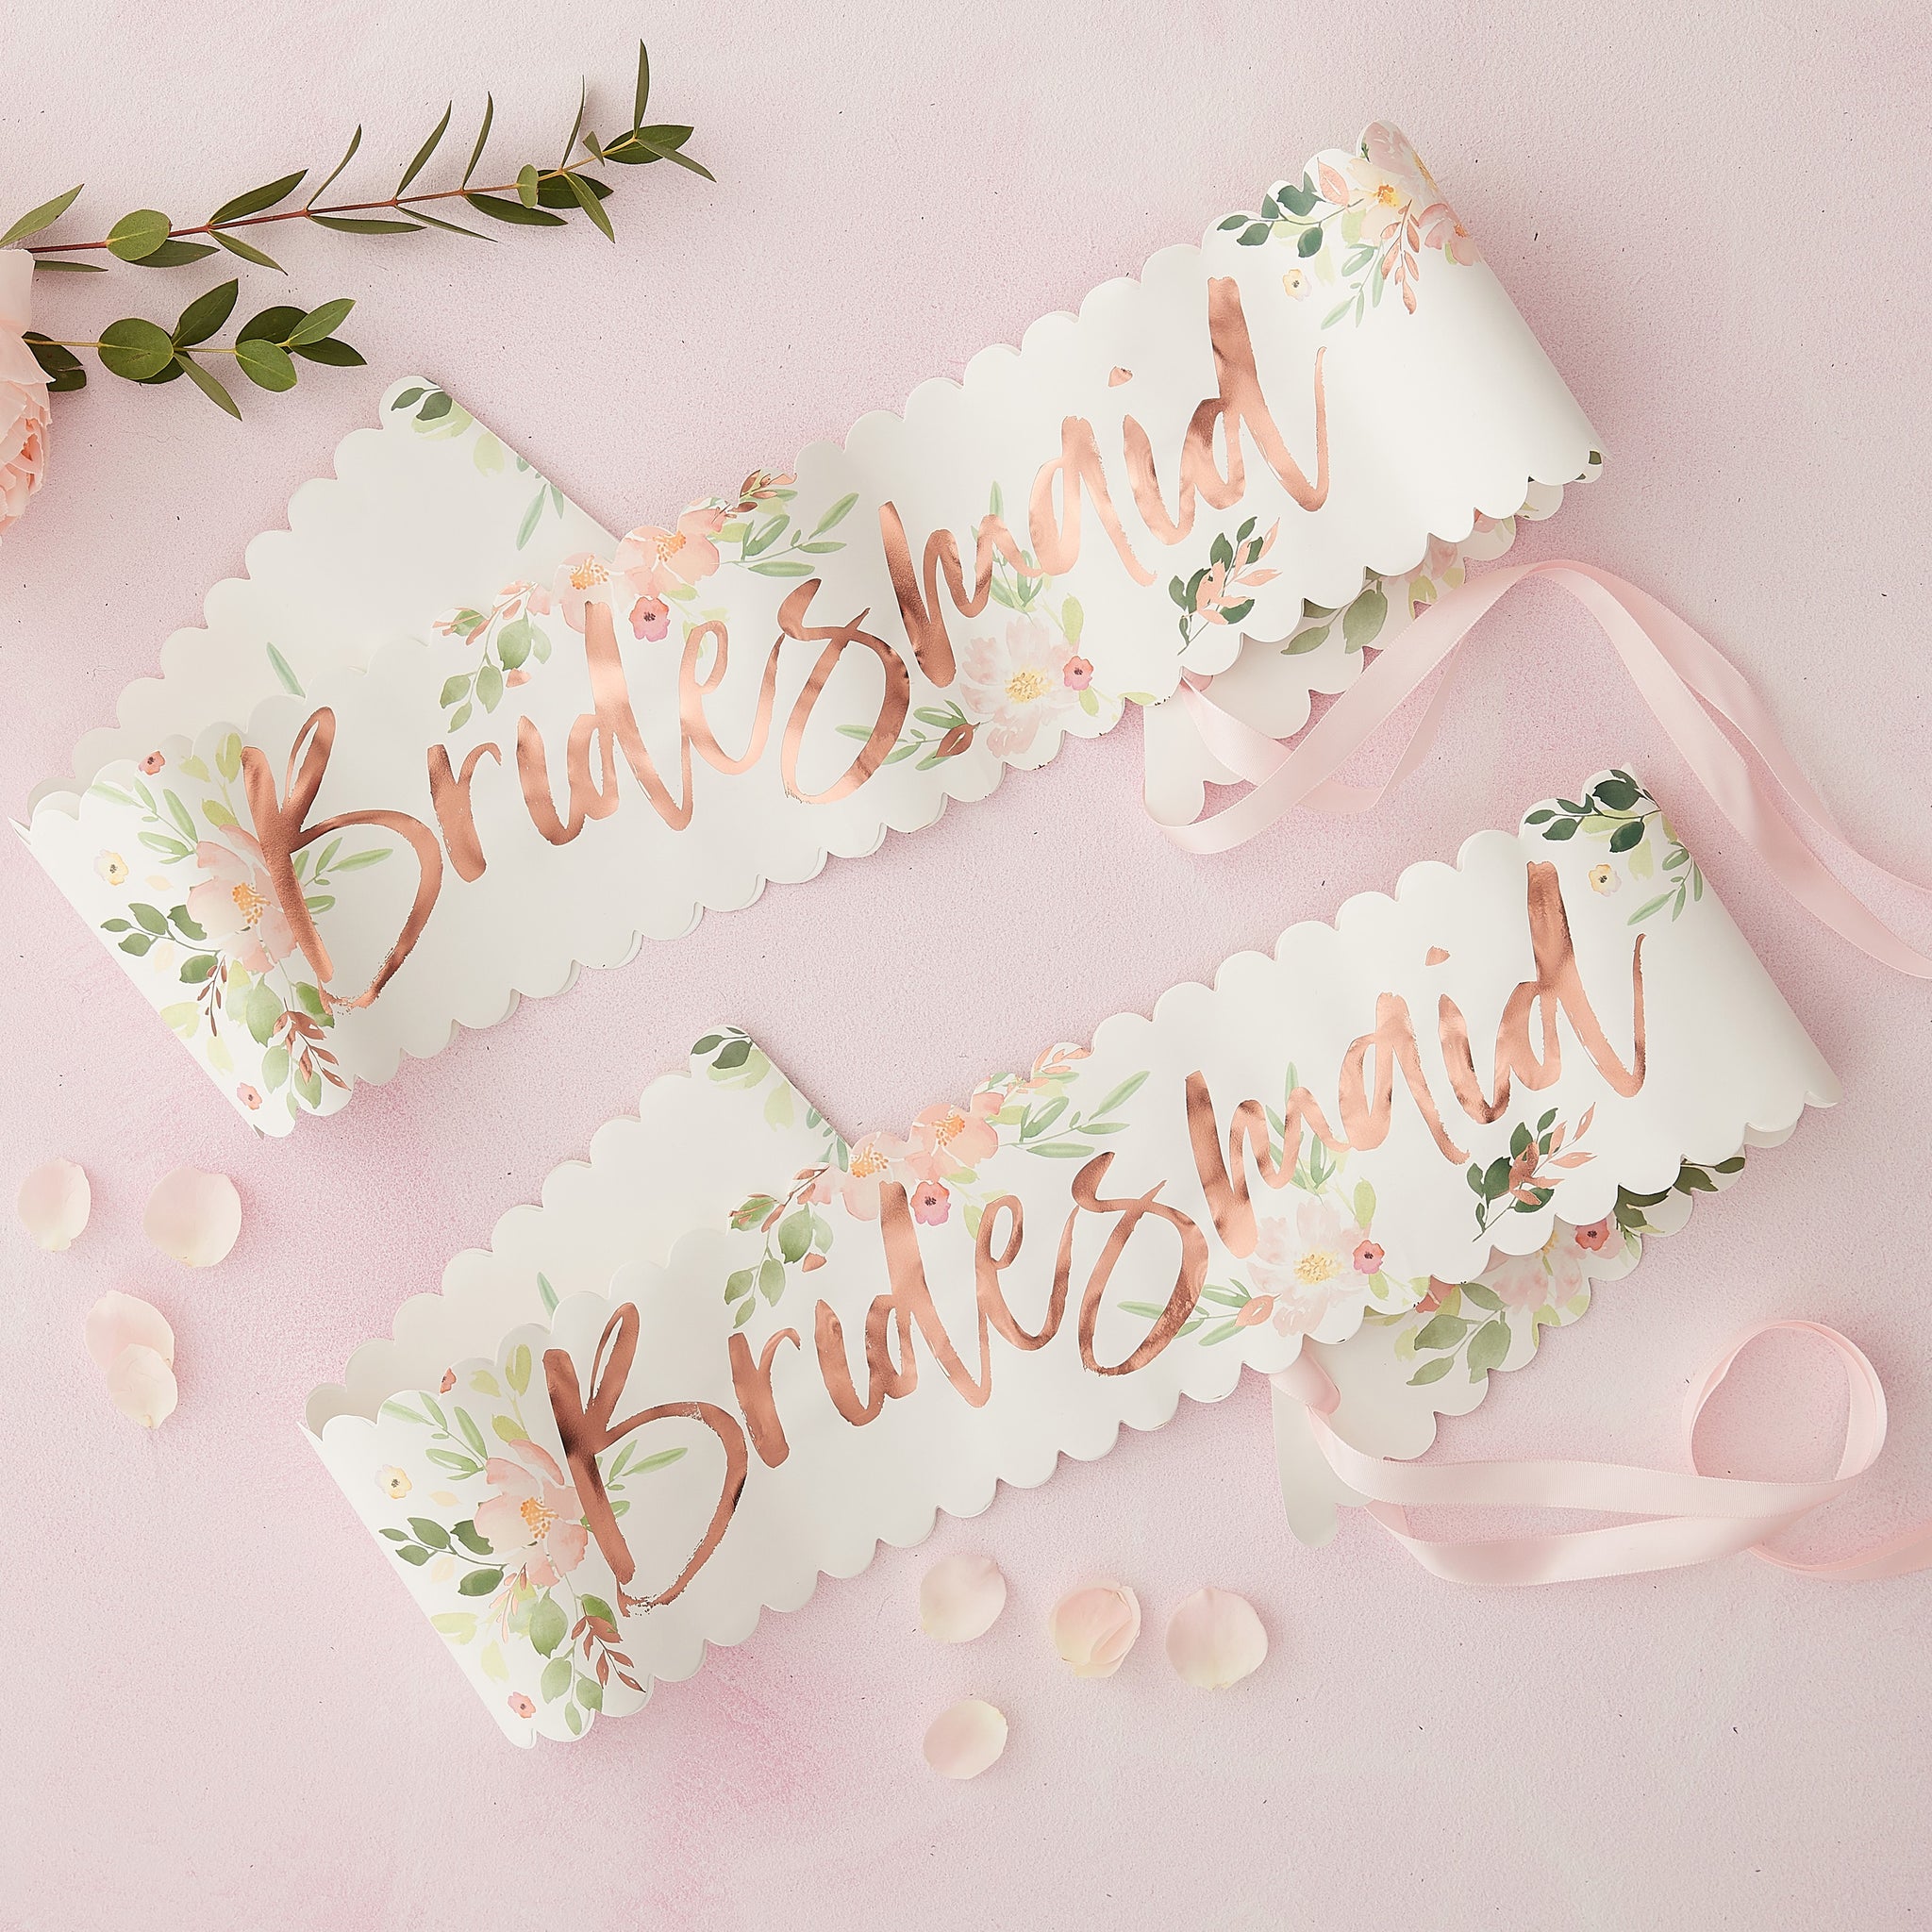 Floral Bridesmaid sash, with rose gold foiling , floral design and scalloped edges ties with a pink ribbon. Sash is made from paper. Would suit floral, Rose Gold, or botanical themed bridal shower or hen party decor